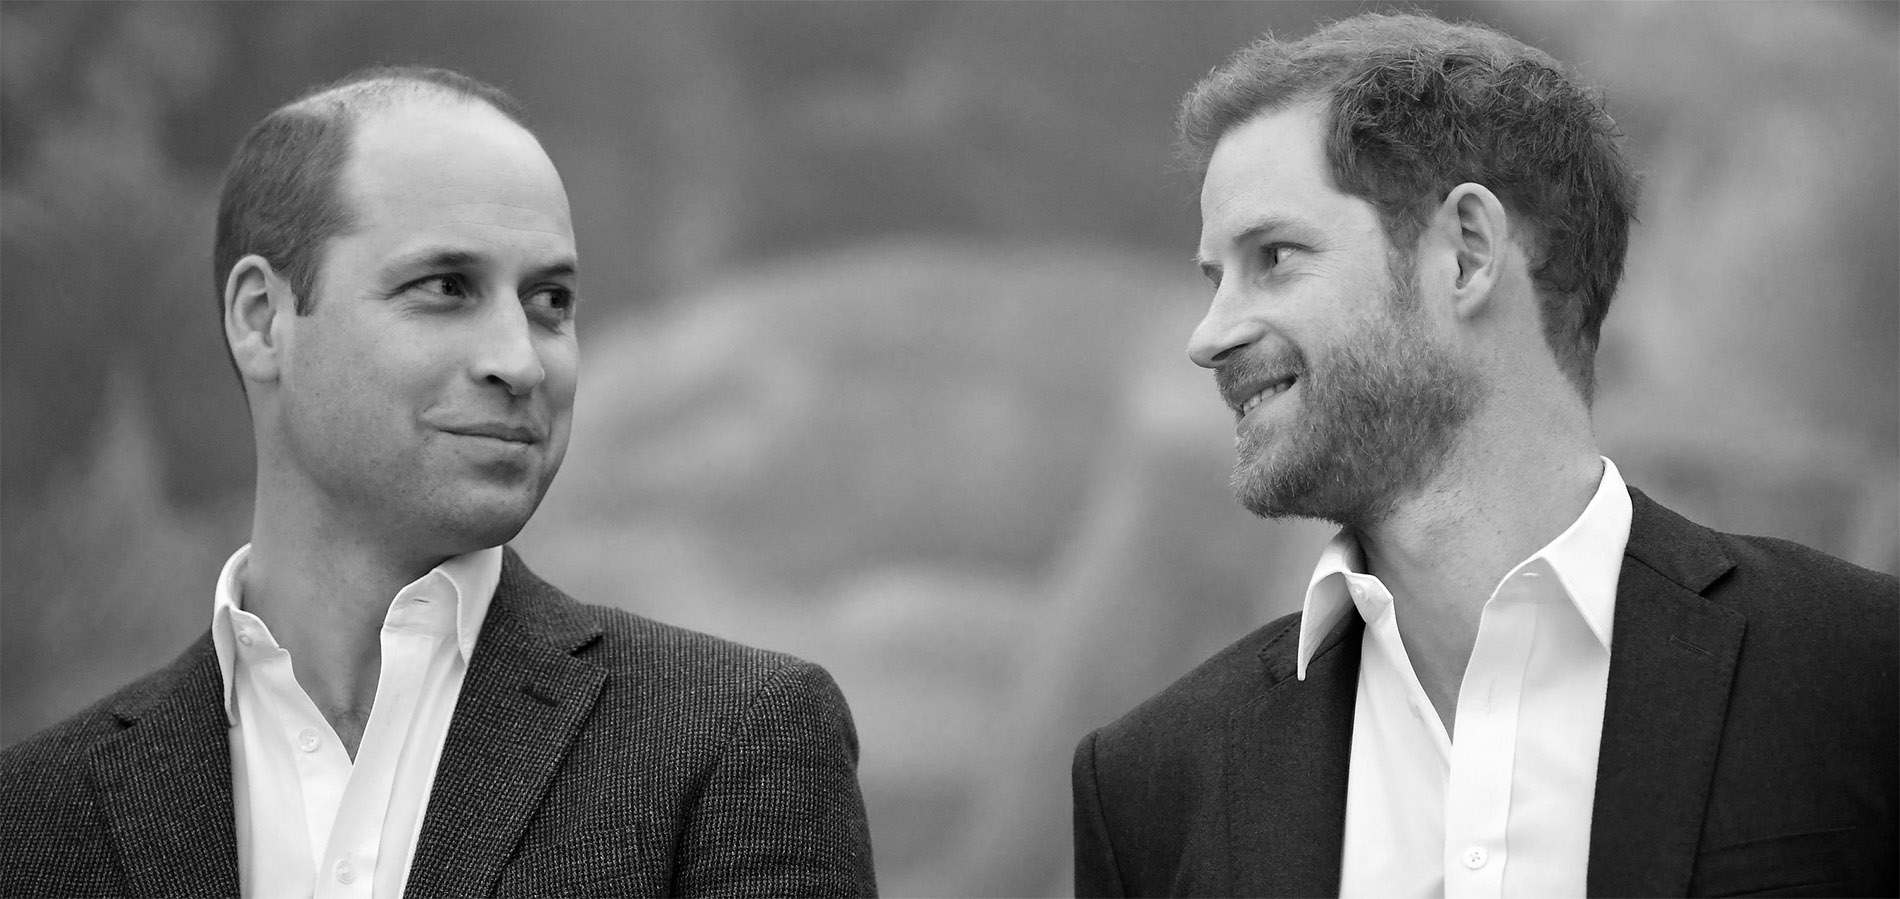 What Do You Have in Common with Princes Harry and William